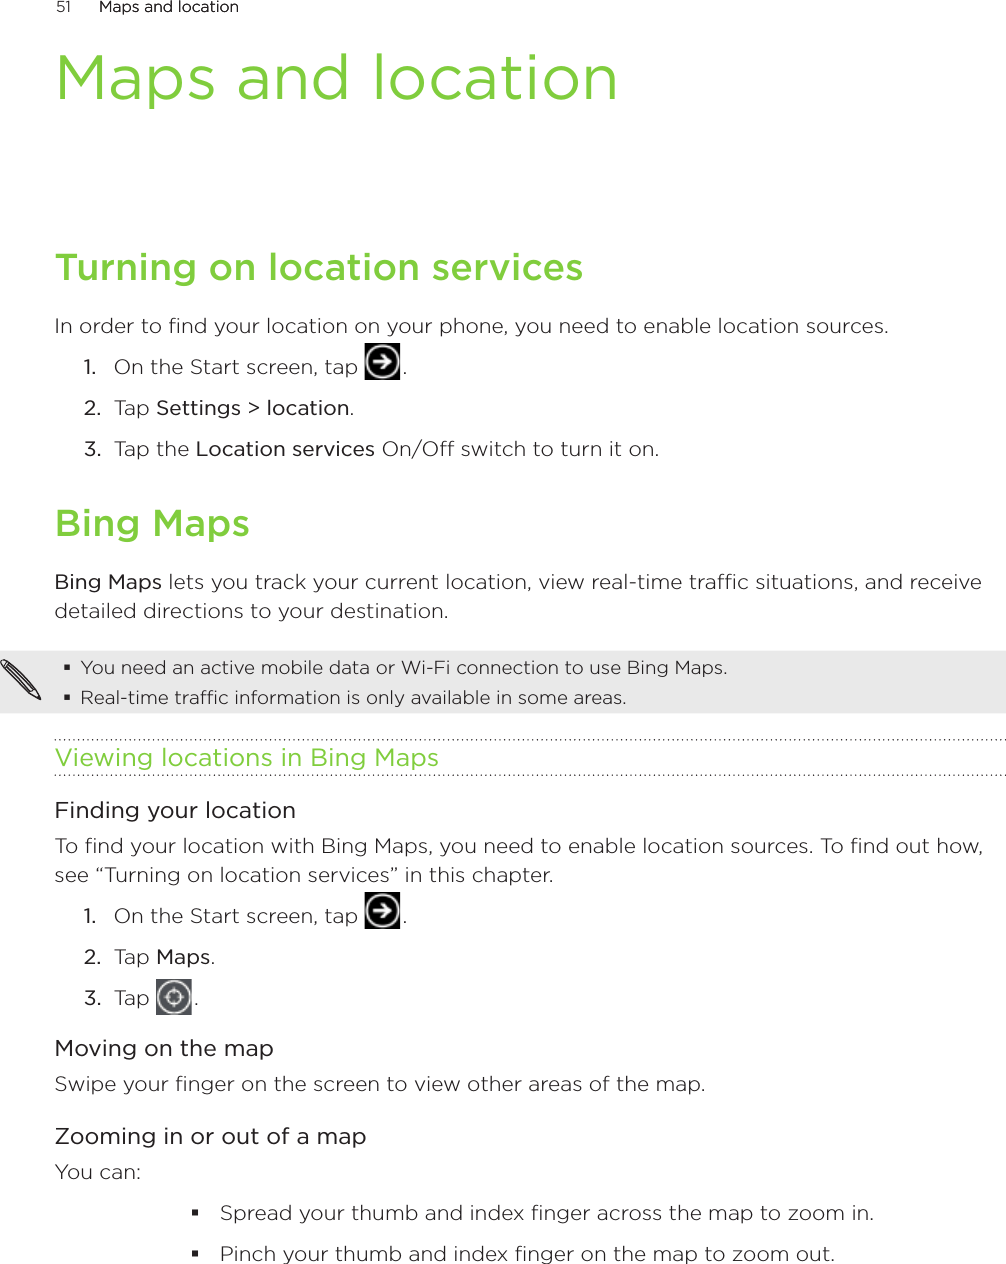 51      Maps and locationMaps and location      Maps and locationTurning on location servicesIn order to find your location on your phone, you need to enable location sources.On the Start screen, tap   .Tap Settings &gt; location.Tap the Location services On/Off switch to turn it on. Bing MapsBing Maps lets you track your current location, view real-time traffic situations, and receive detailed directions to your destination. You need an active mobile data or Wi-Fi connection to use Bing Maps.Real-time traffic information is only available in some areas.Viewing locations in Bing MapsFinding your locationTo find your location with Bing Maps, you need to enable location sources. To find out how, see “Turning on location services” in this chapter.On the Start screen, tap   .Tap Maps.Tap   .Moving on the mapSwipe your finger on the screen to view other areas of the map.Zooming in or out of a mapYou can:Spread your thumb and index finger across the map to zoom in.Pinch your thumb and index finger on the map to zoom out.1.2.3.1.2.3.